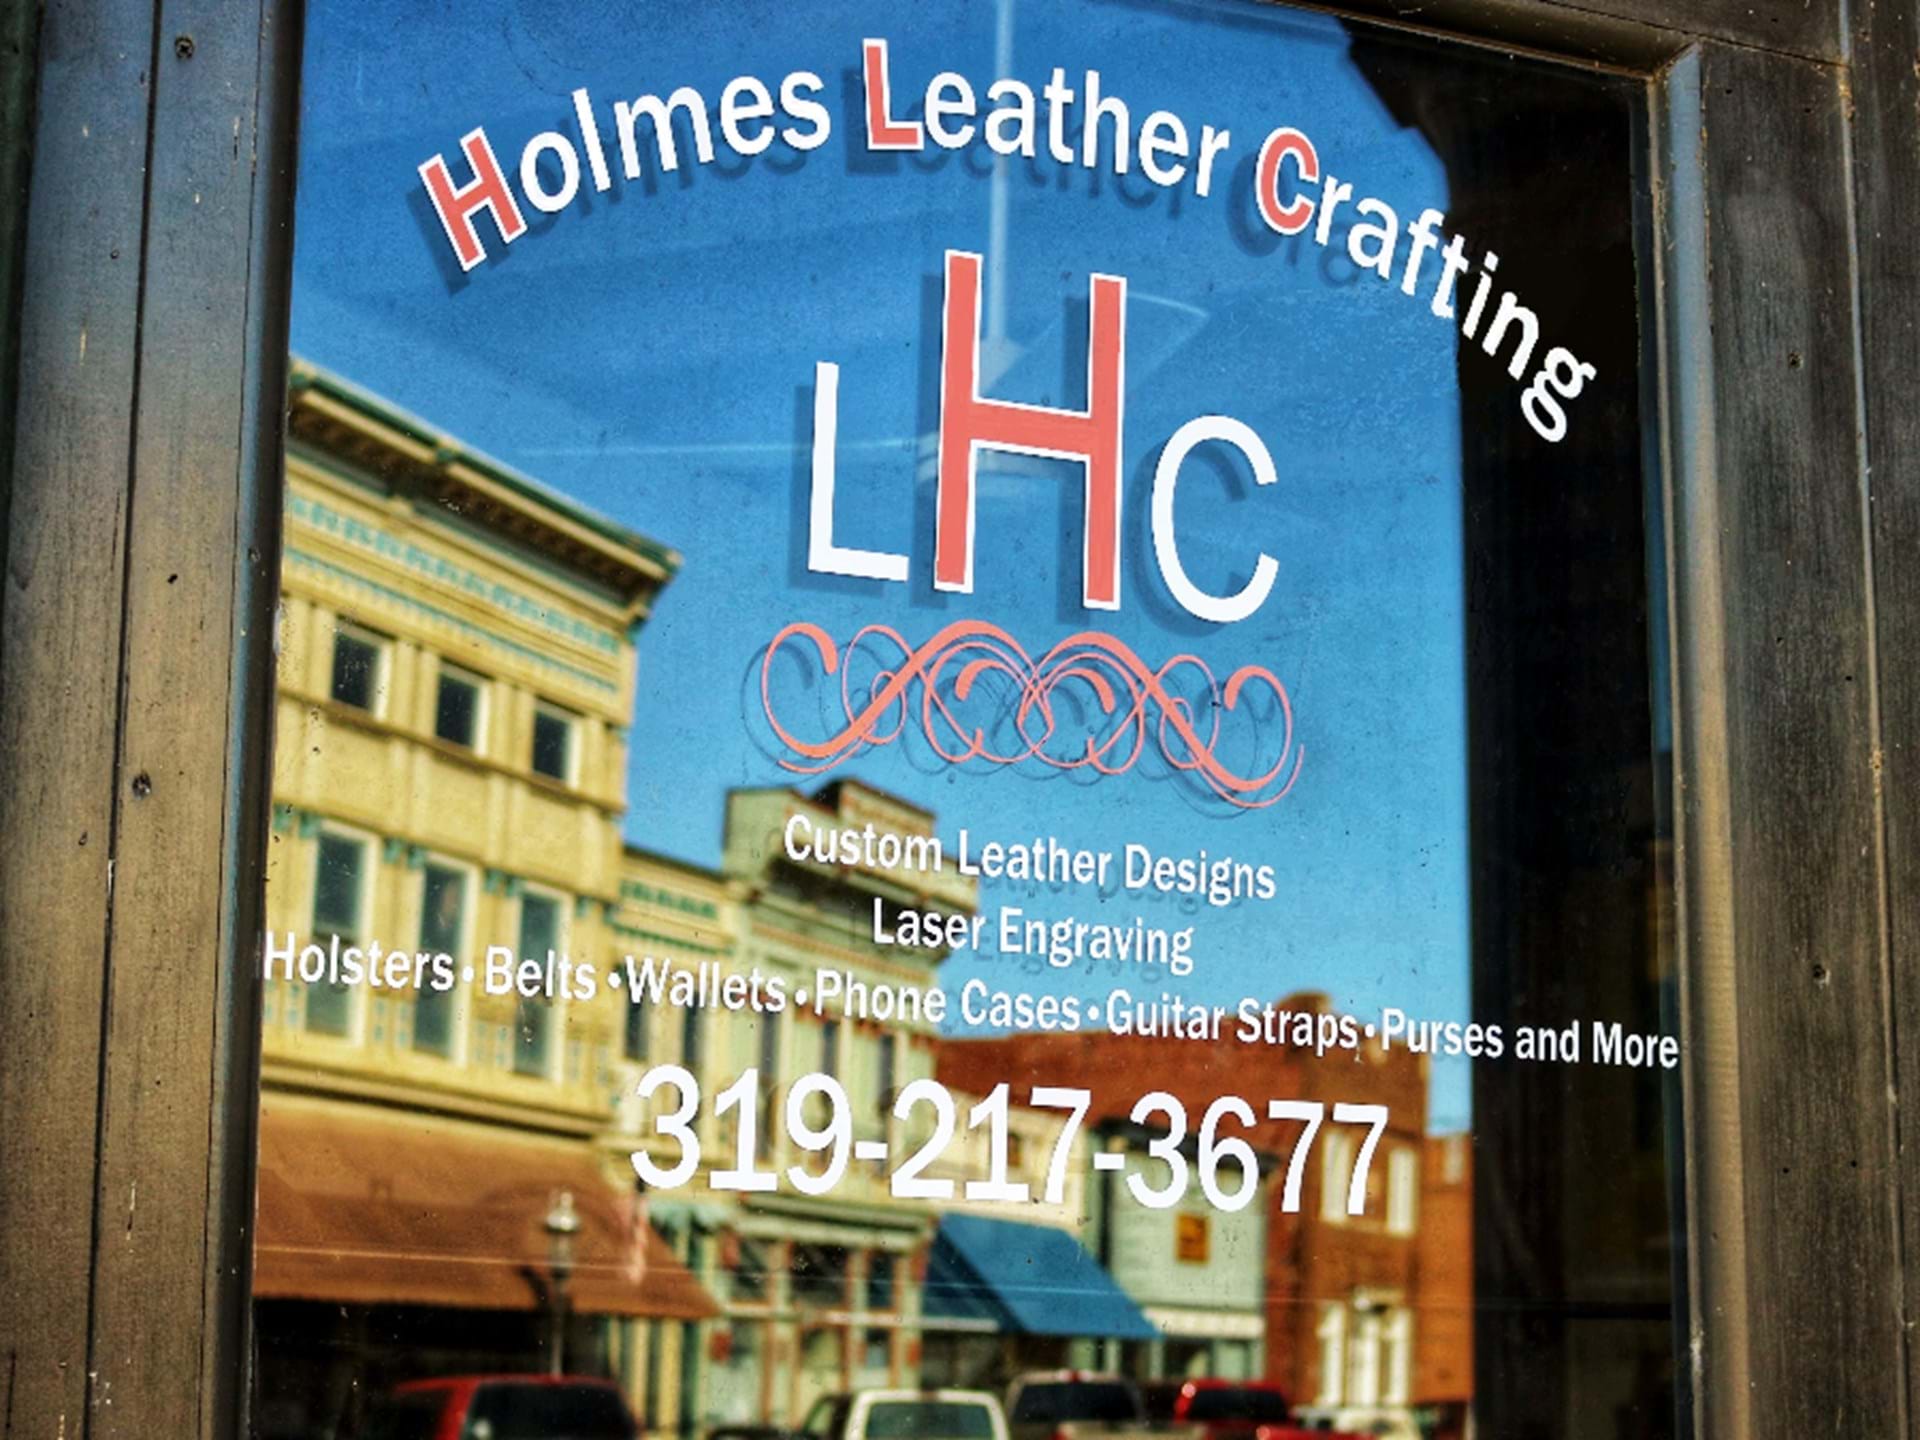 Holmes Leather Crafting